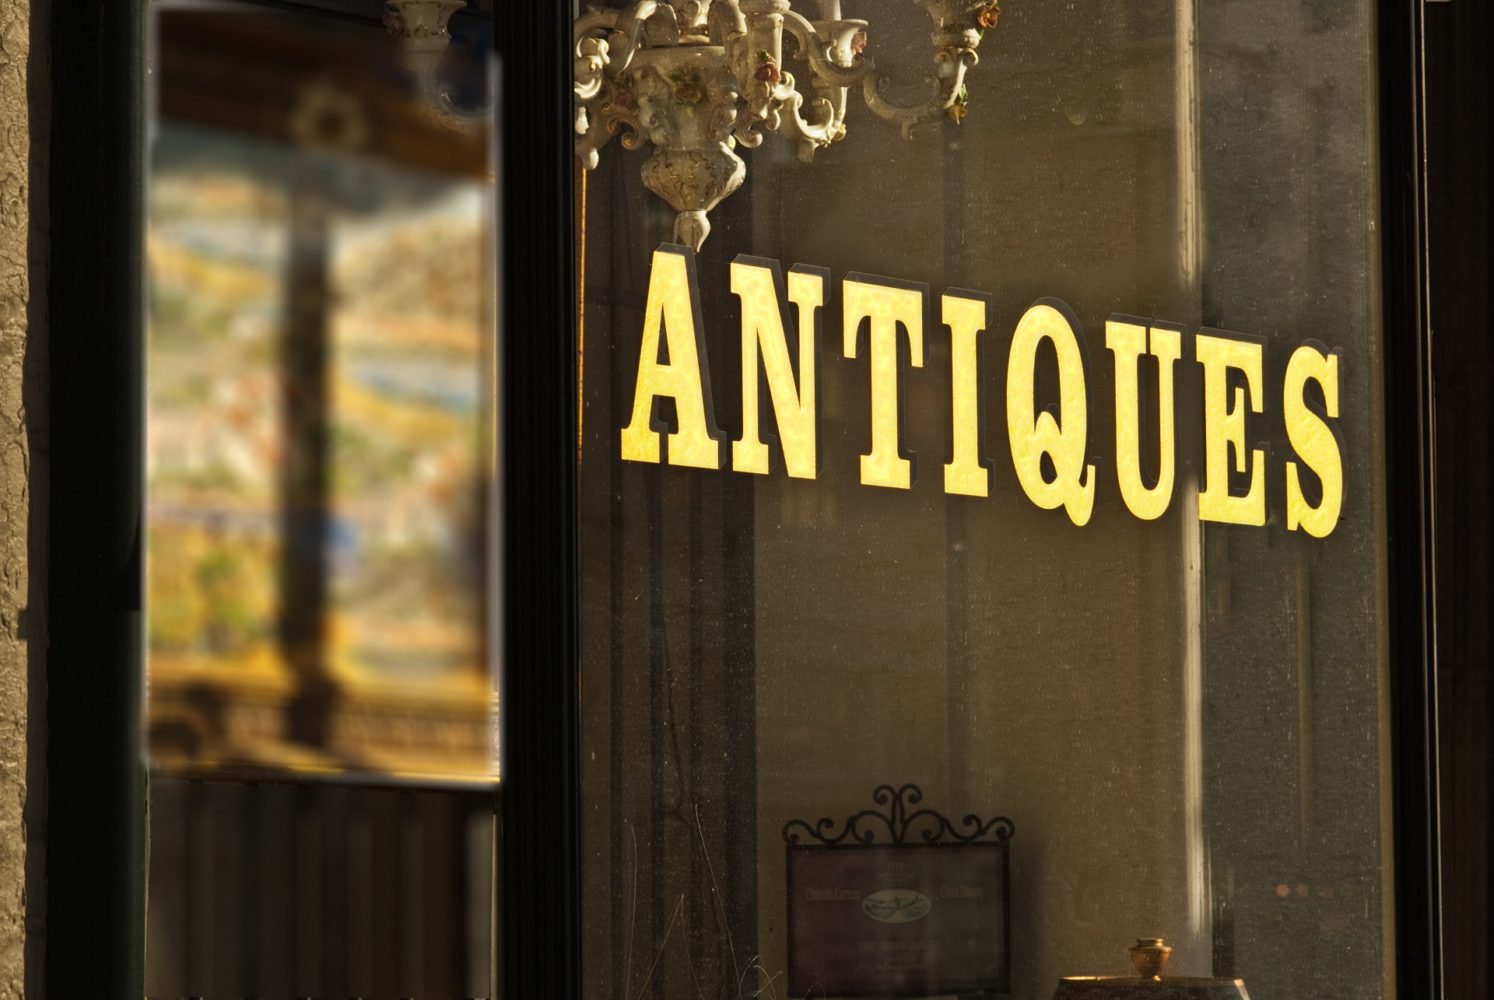 Insurance For Antique Shops In Canada - ALIGNED Insurance brokers